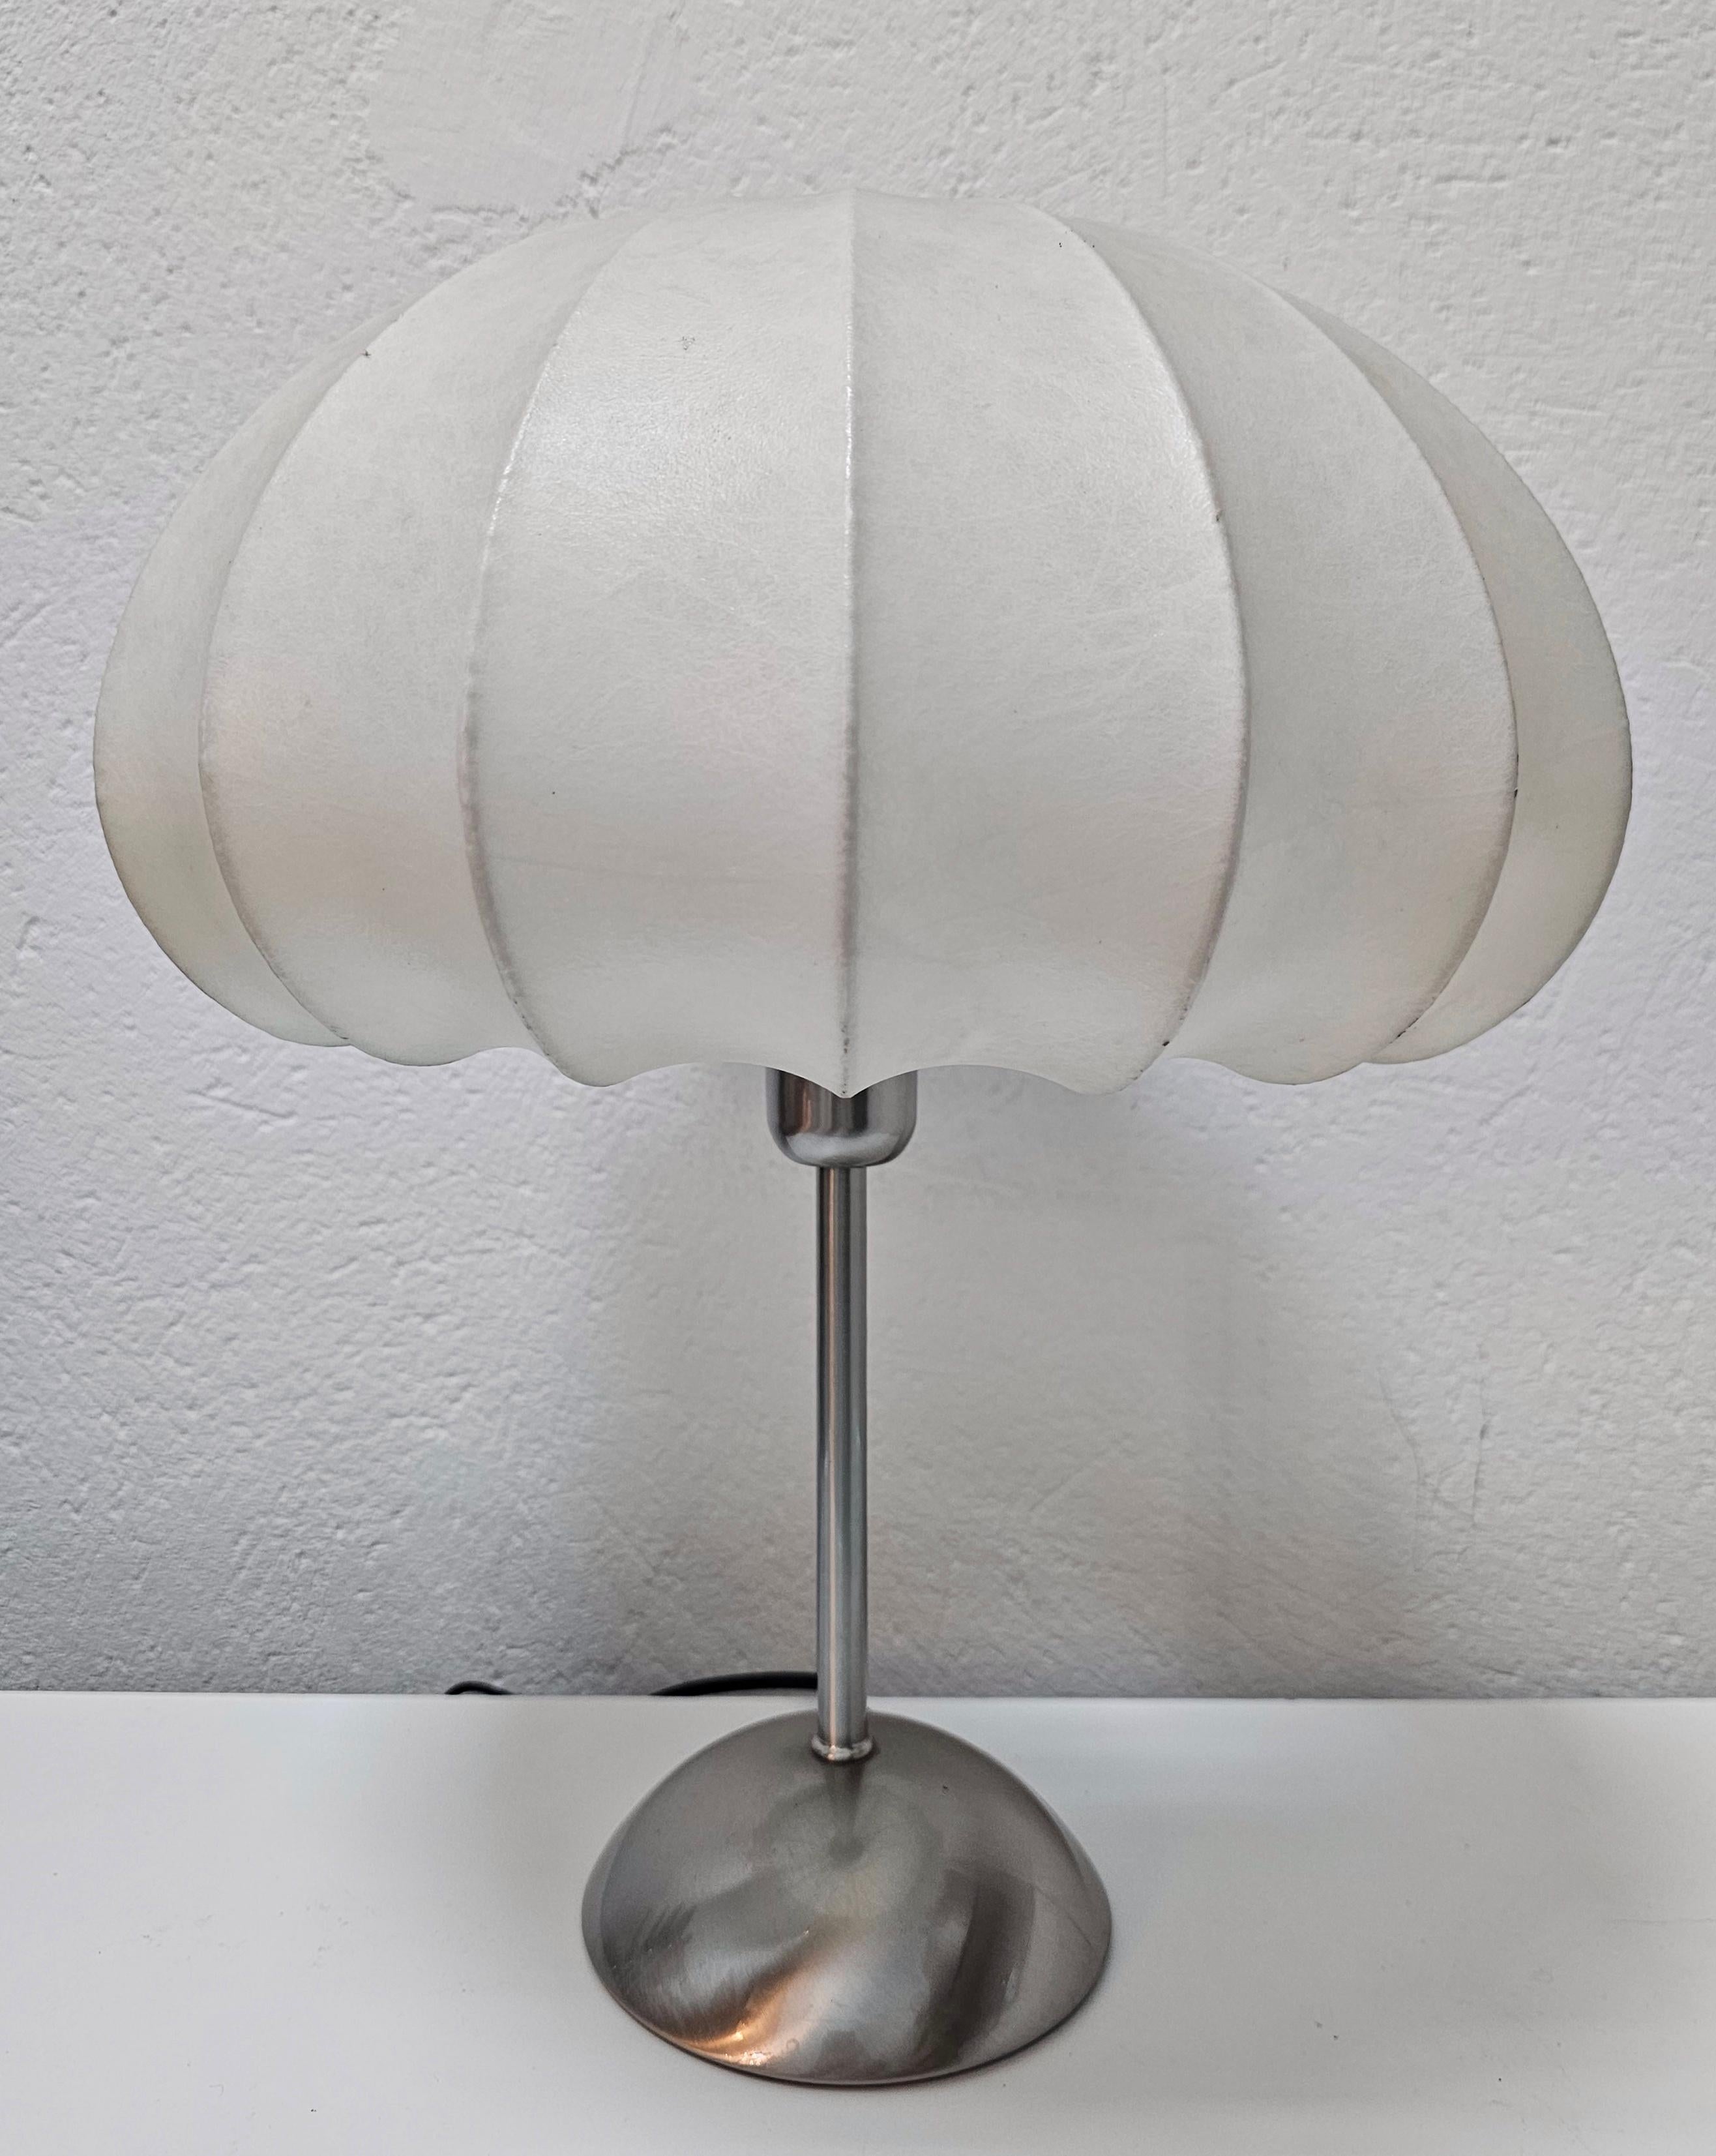 Late 20th Century Mid Century Modern Cocoon Table Lamp in style of Achille Castiglioni, Italy 1970 For Sale